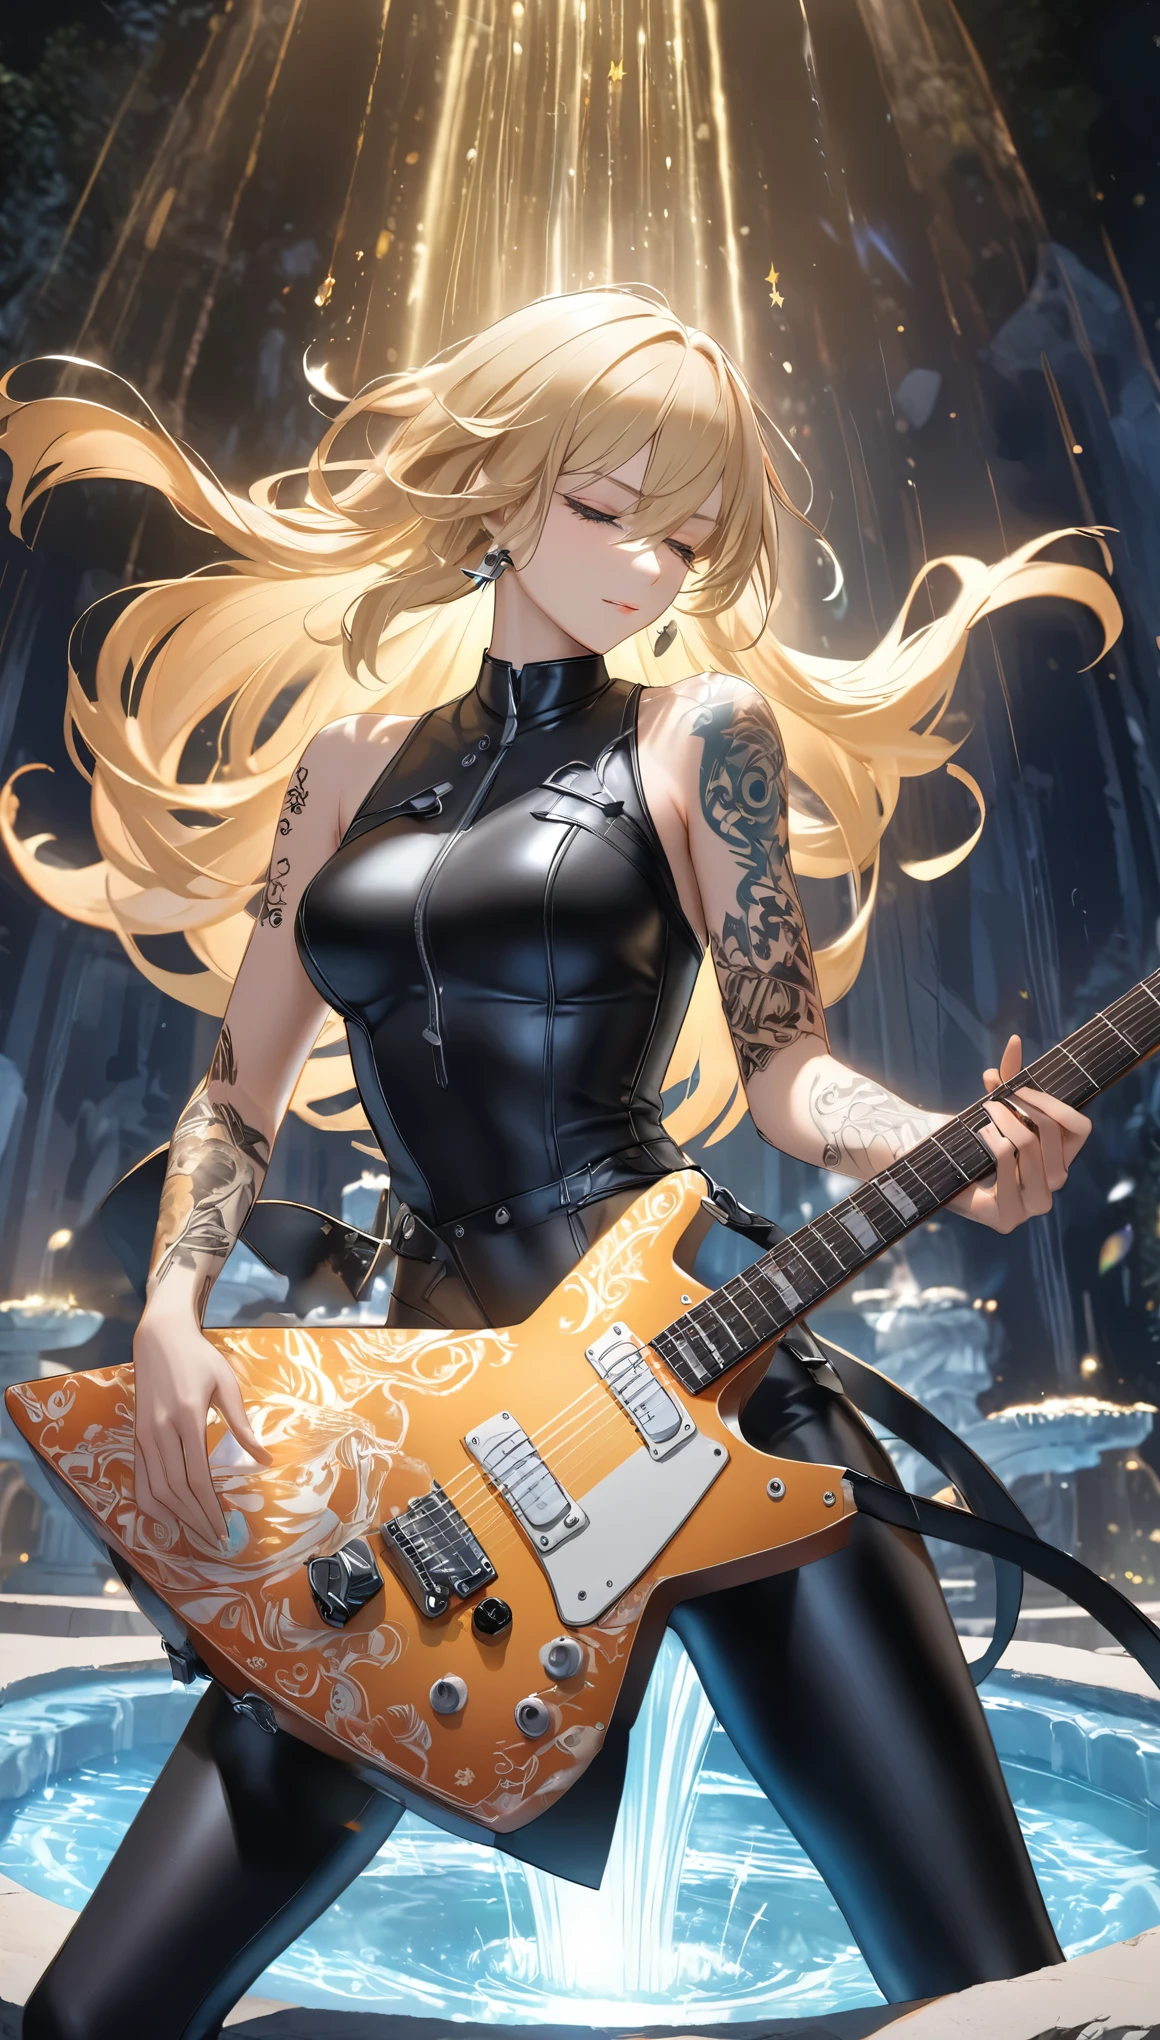 best quality, super fine, 16k, extremely detailed, 2.5D, delicate and dynamic, beautiful and cool rock guitarist playing guitar solo while standing in the center of stone fountain, cool guitar with (star-shaped white body), slim and tight leather outfit, tattoo on arms, blonde hair, cool standing posture, mysterious and fantastical light-up effect